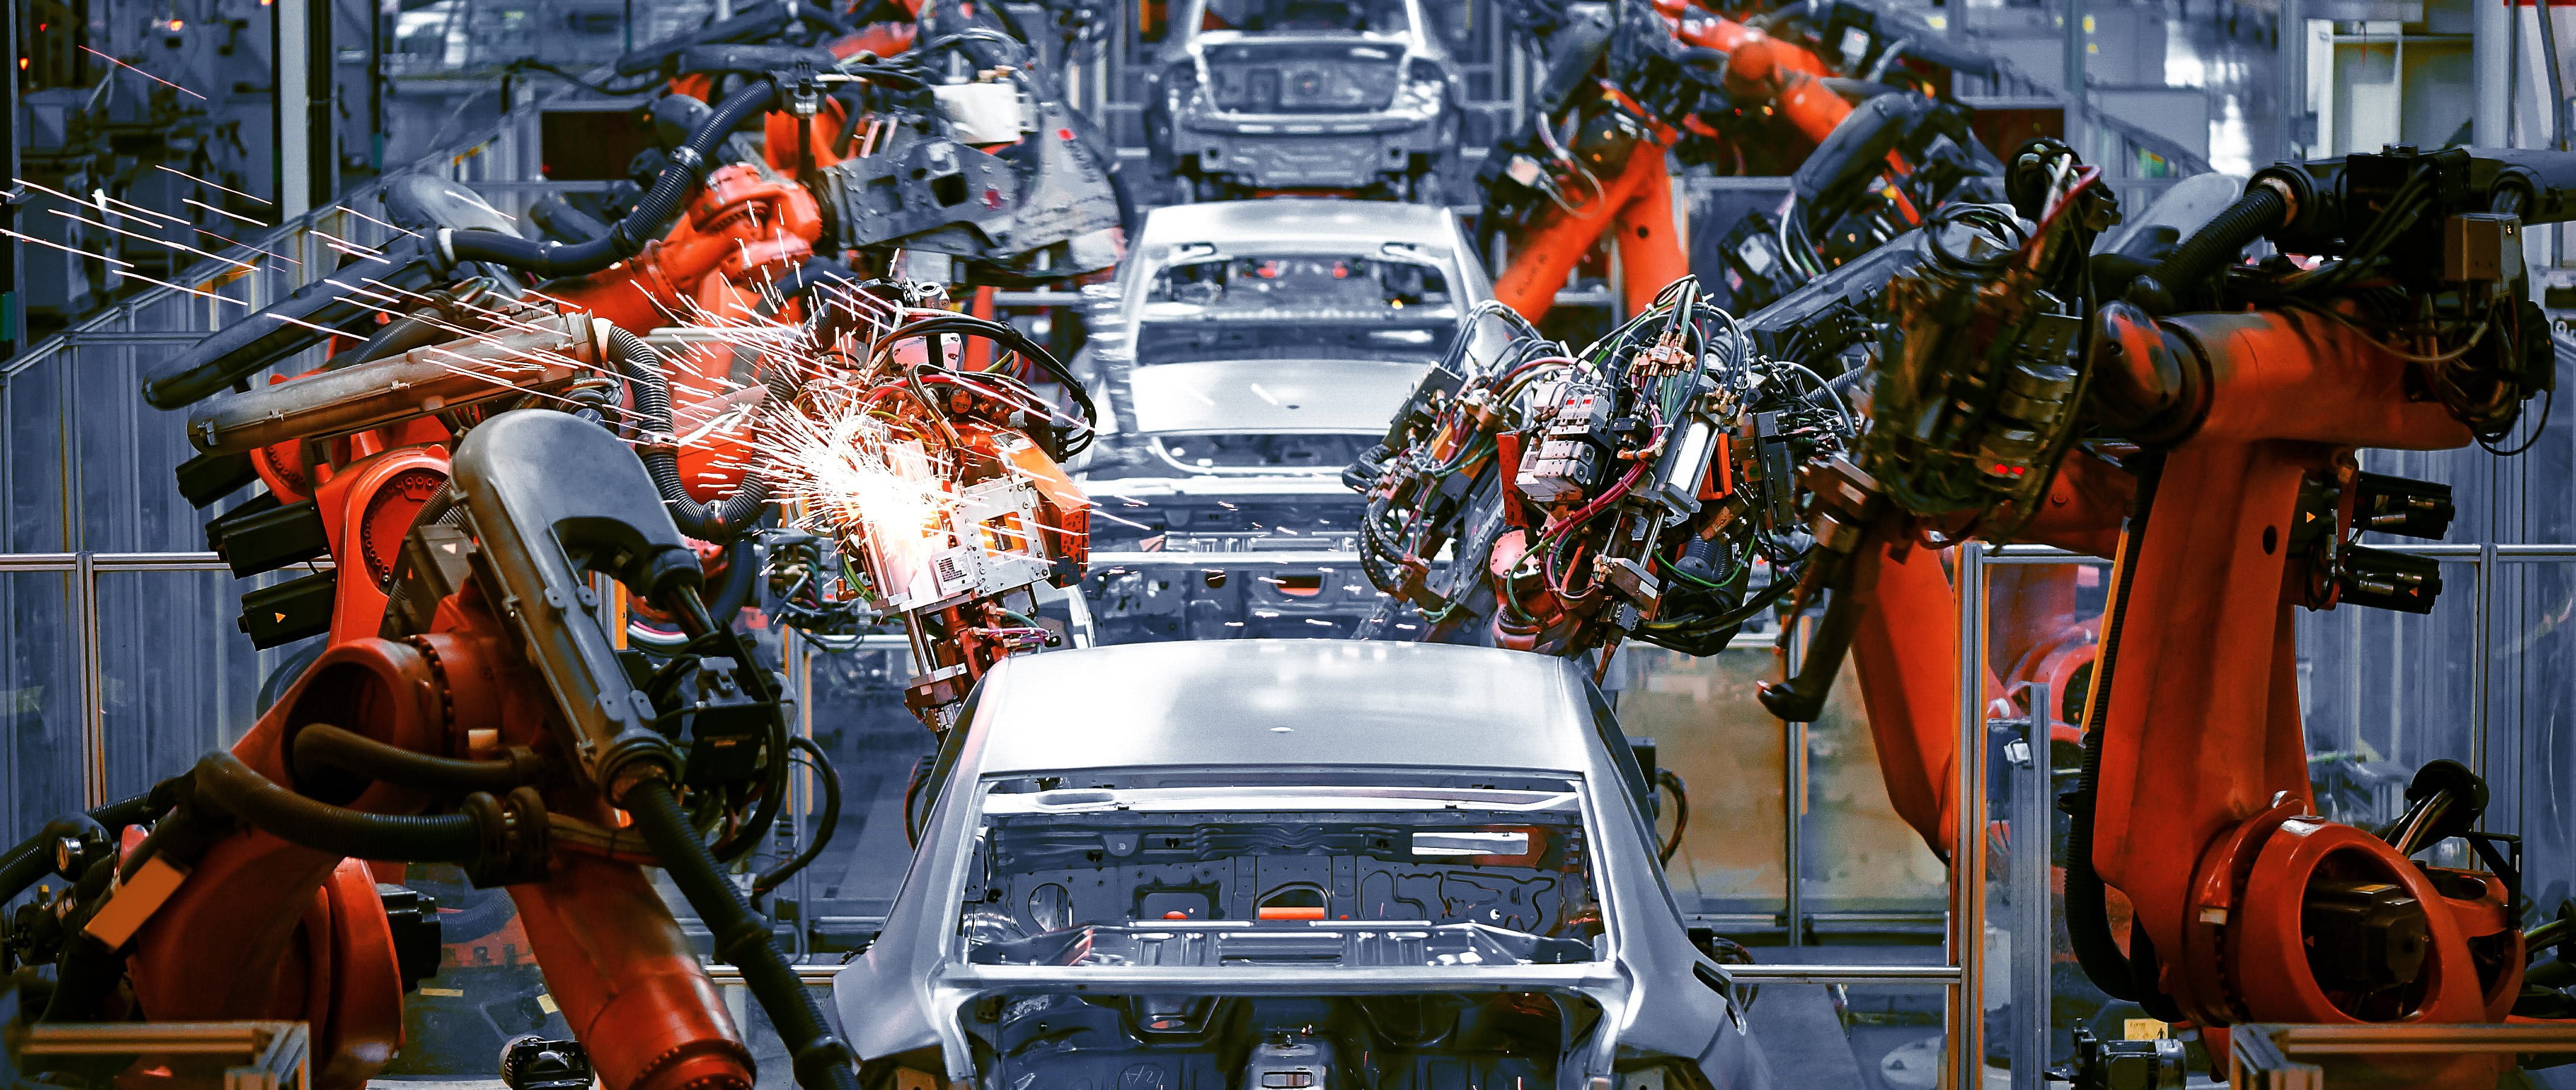 Automated robotic arms assembling cars on a production line in an automotive factory. Sparks fly from welding robots as vehicles move through the assembly process